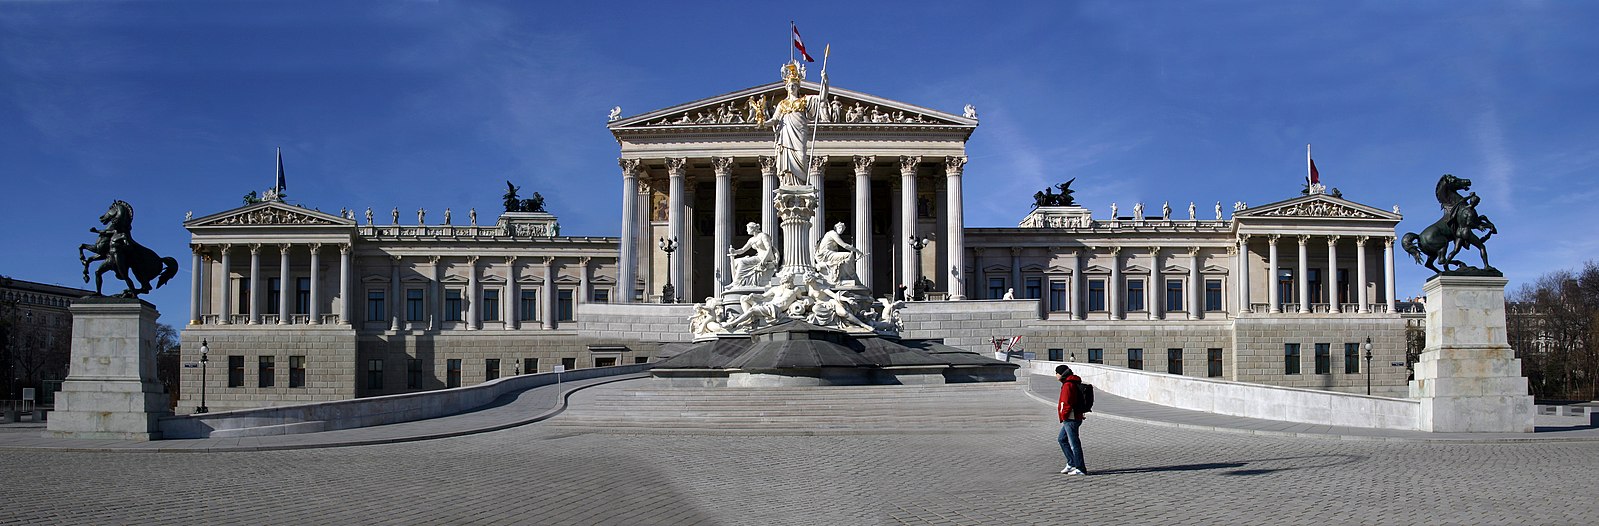 Parlament (c) Wikimedia Commons